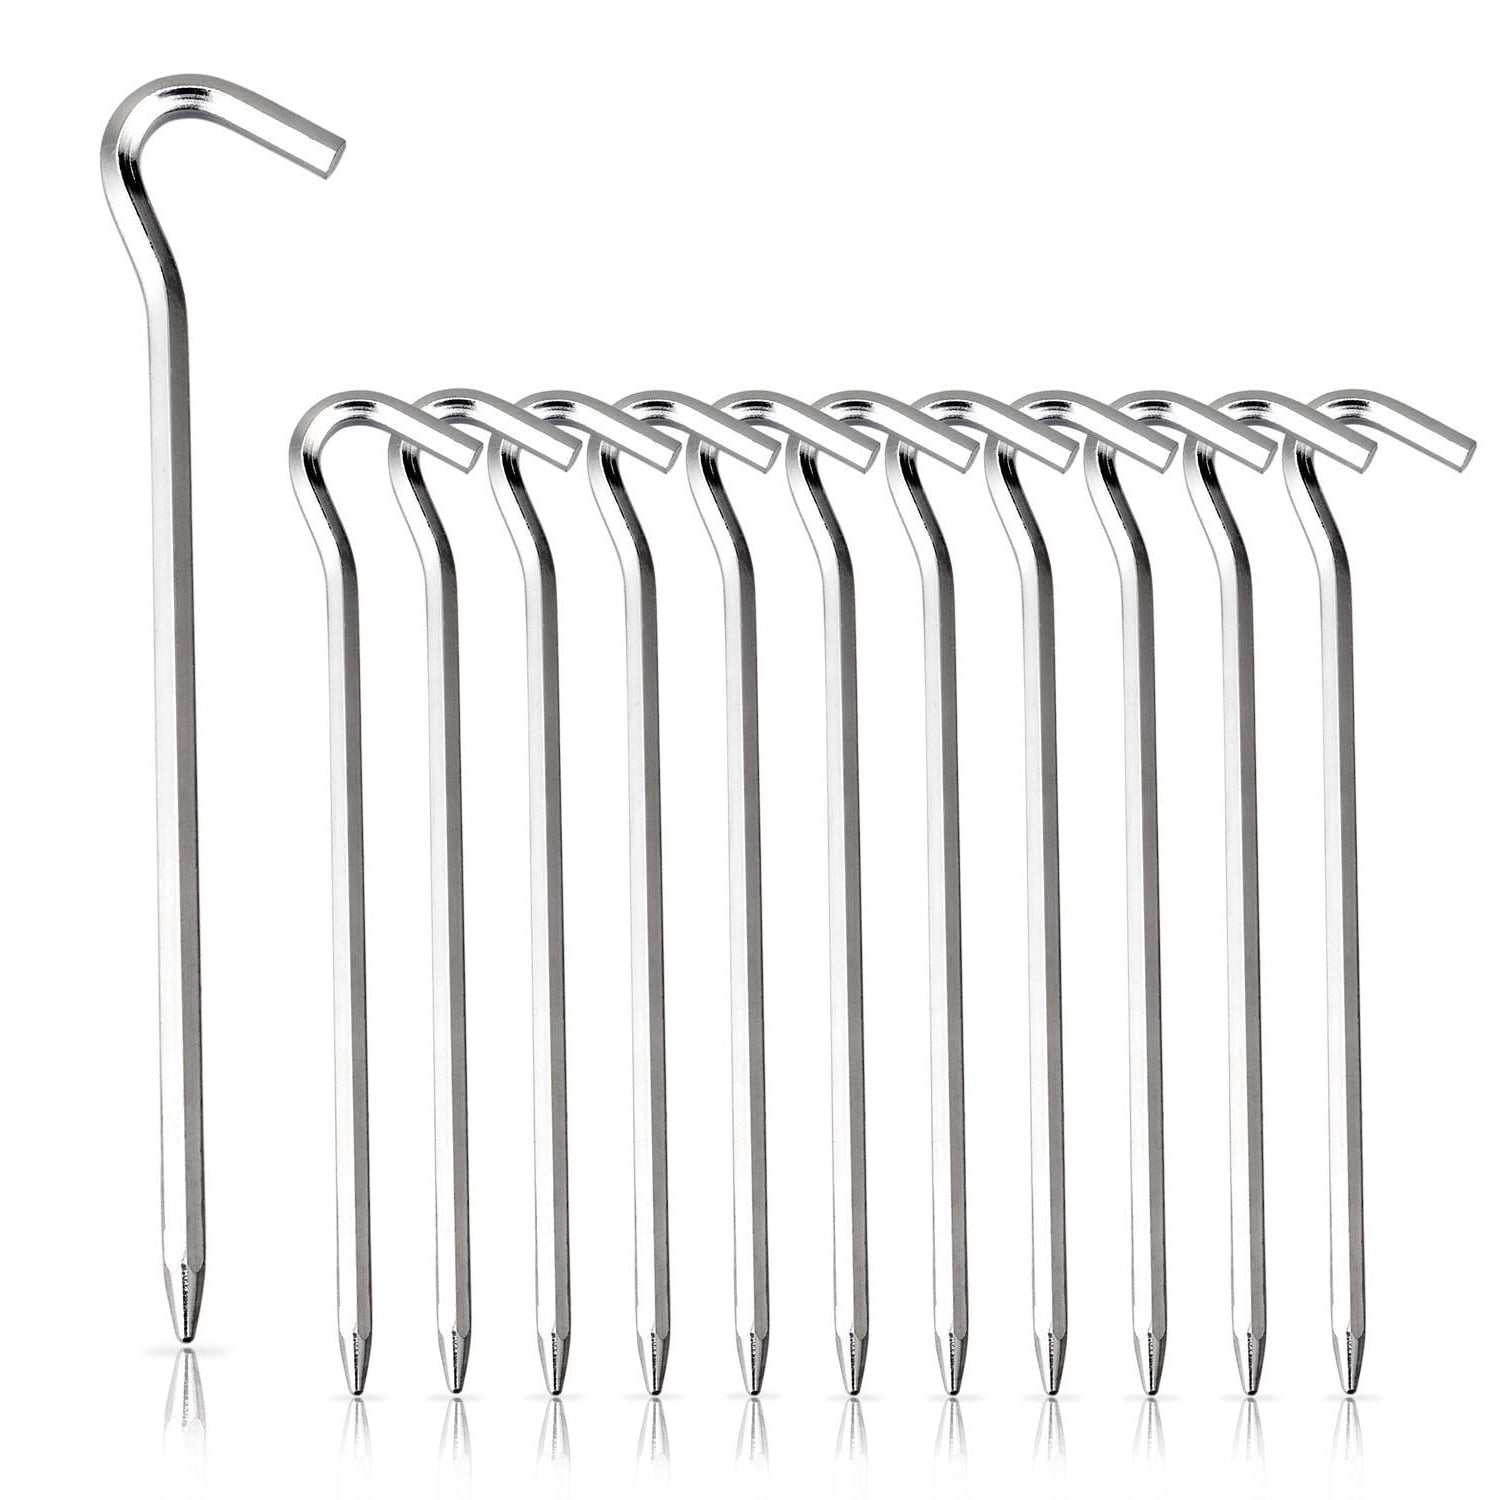 Tulead Tent Stakes Aluminum Alloy Tent Pegs Stakes with Hooks Pack of 12 